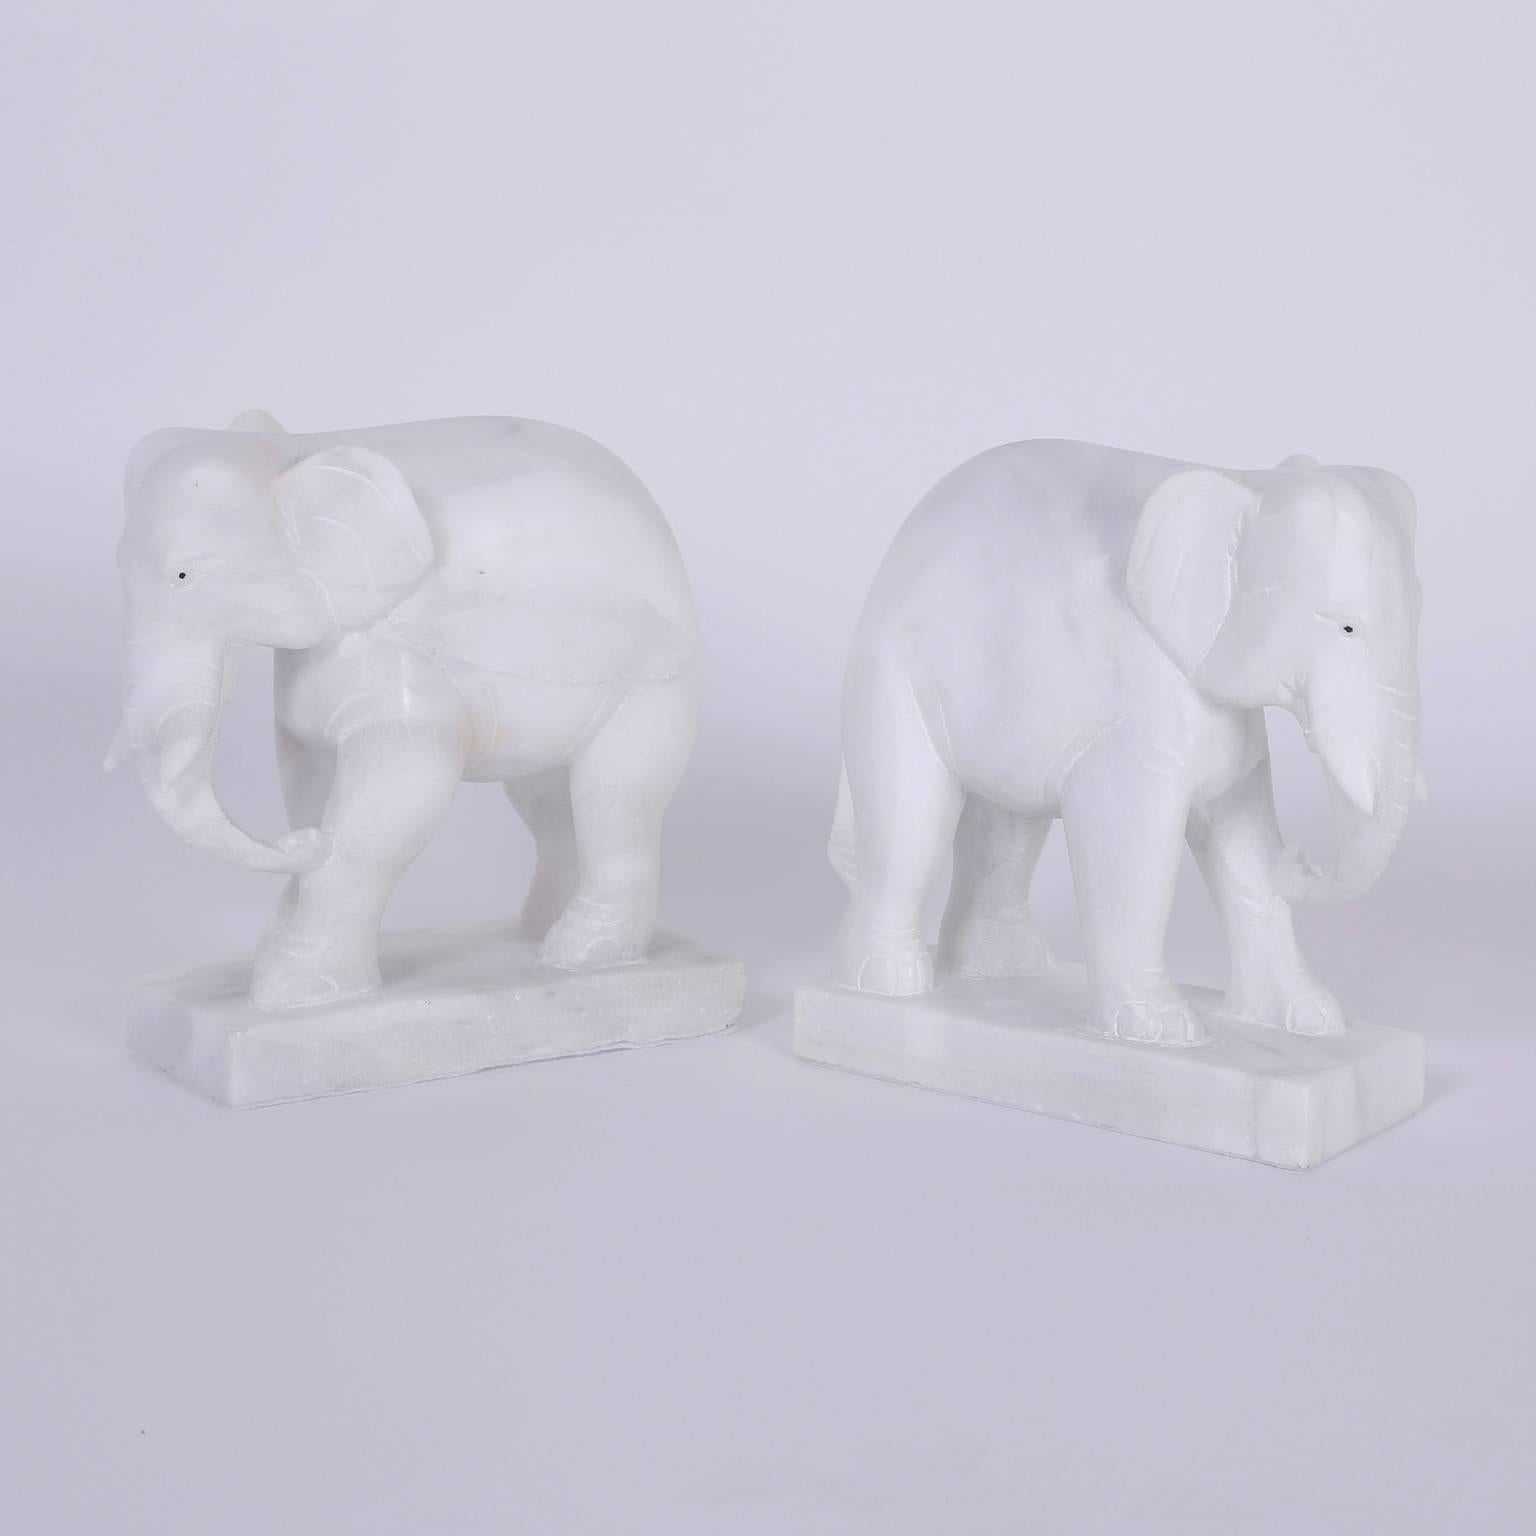 You can enjoy this pair of British Colonial alabaster elephants as bookends or just appreciate them as objects of art. Hand-carved from blocks of stone and ready to stand for decades.